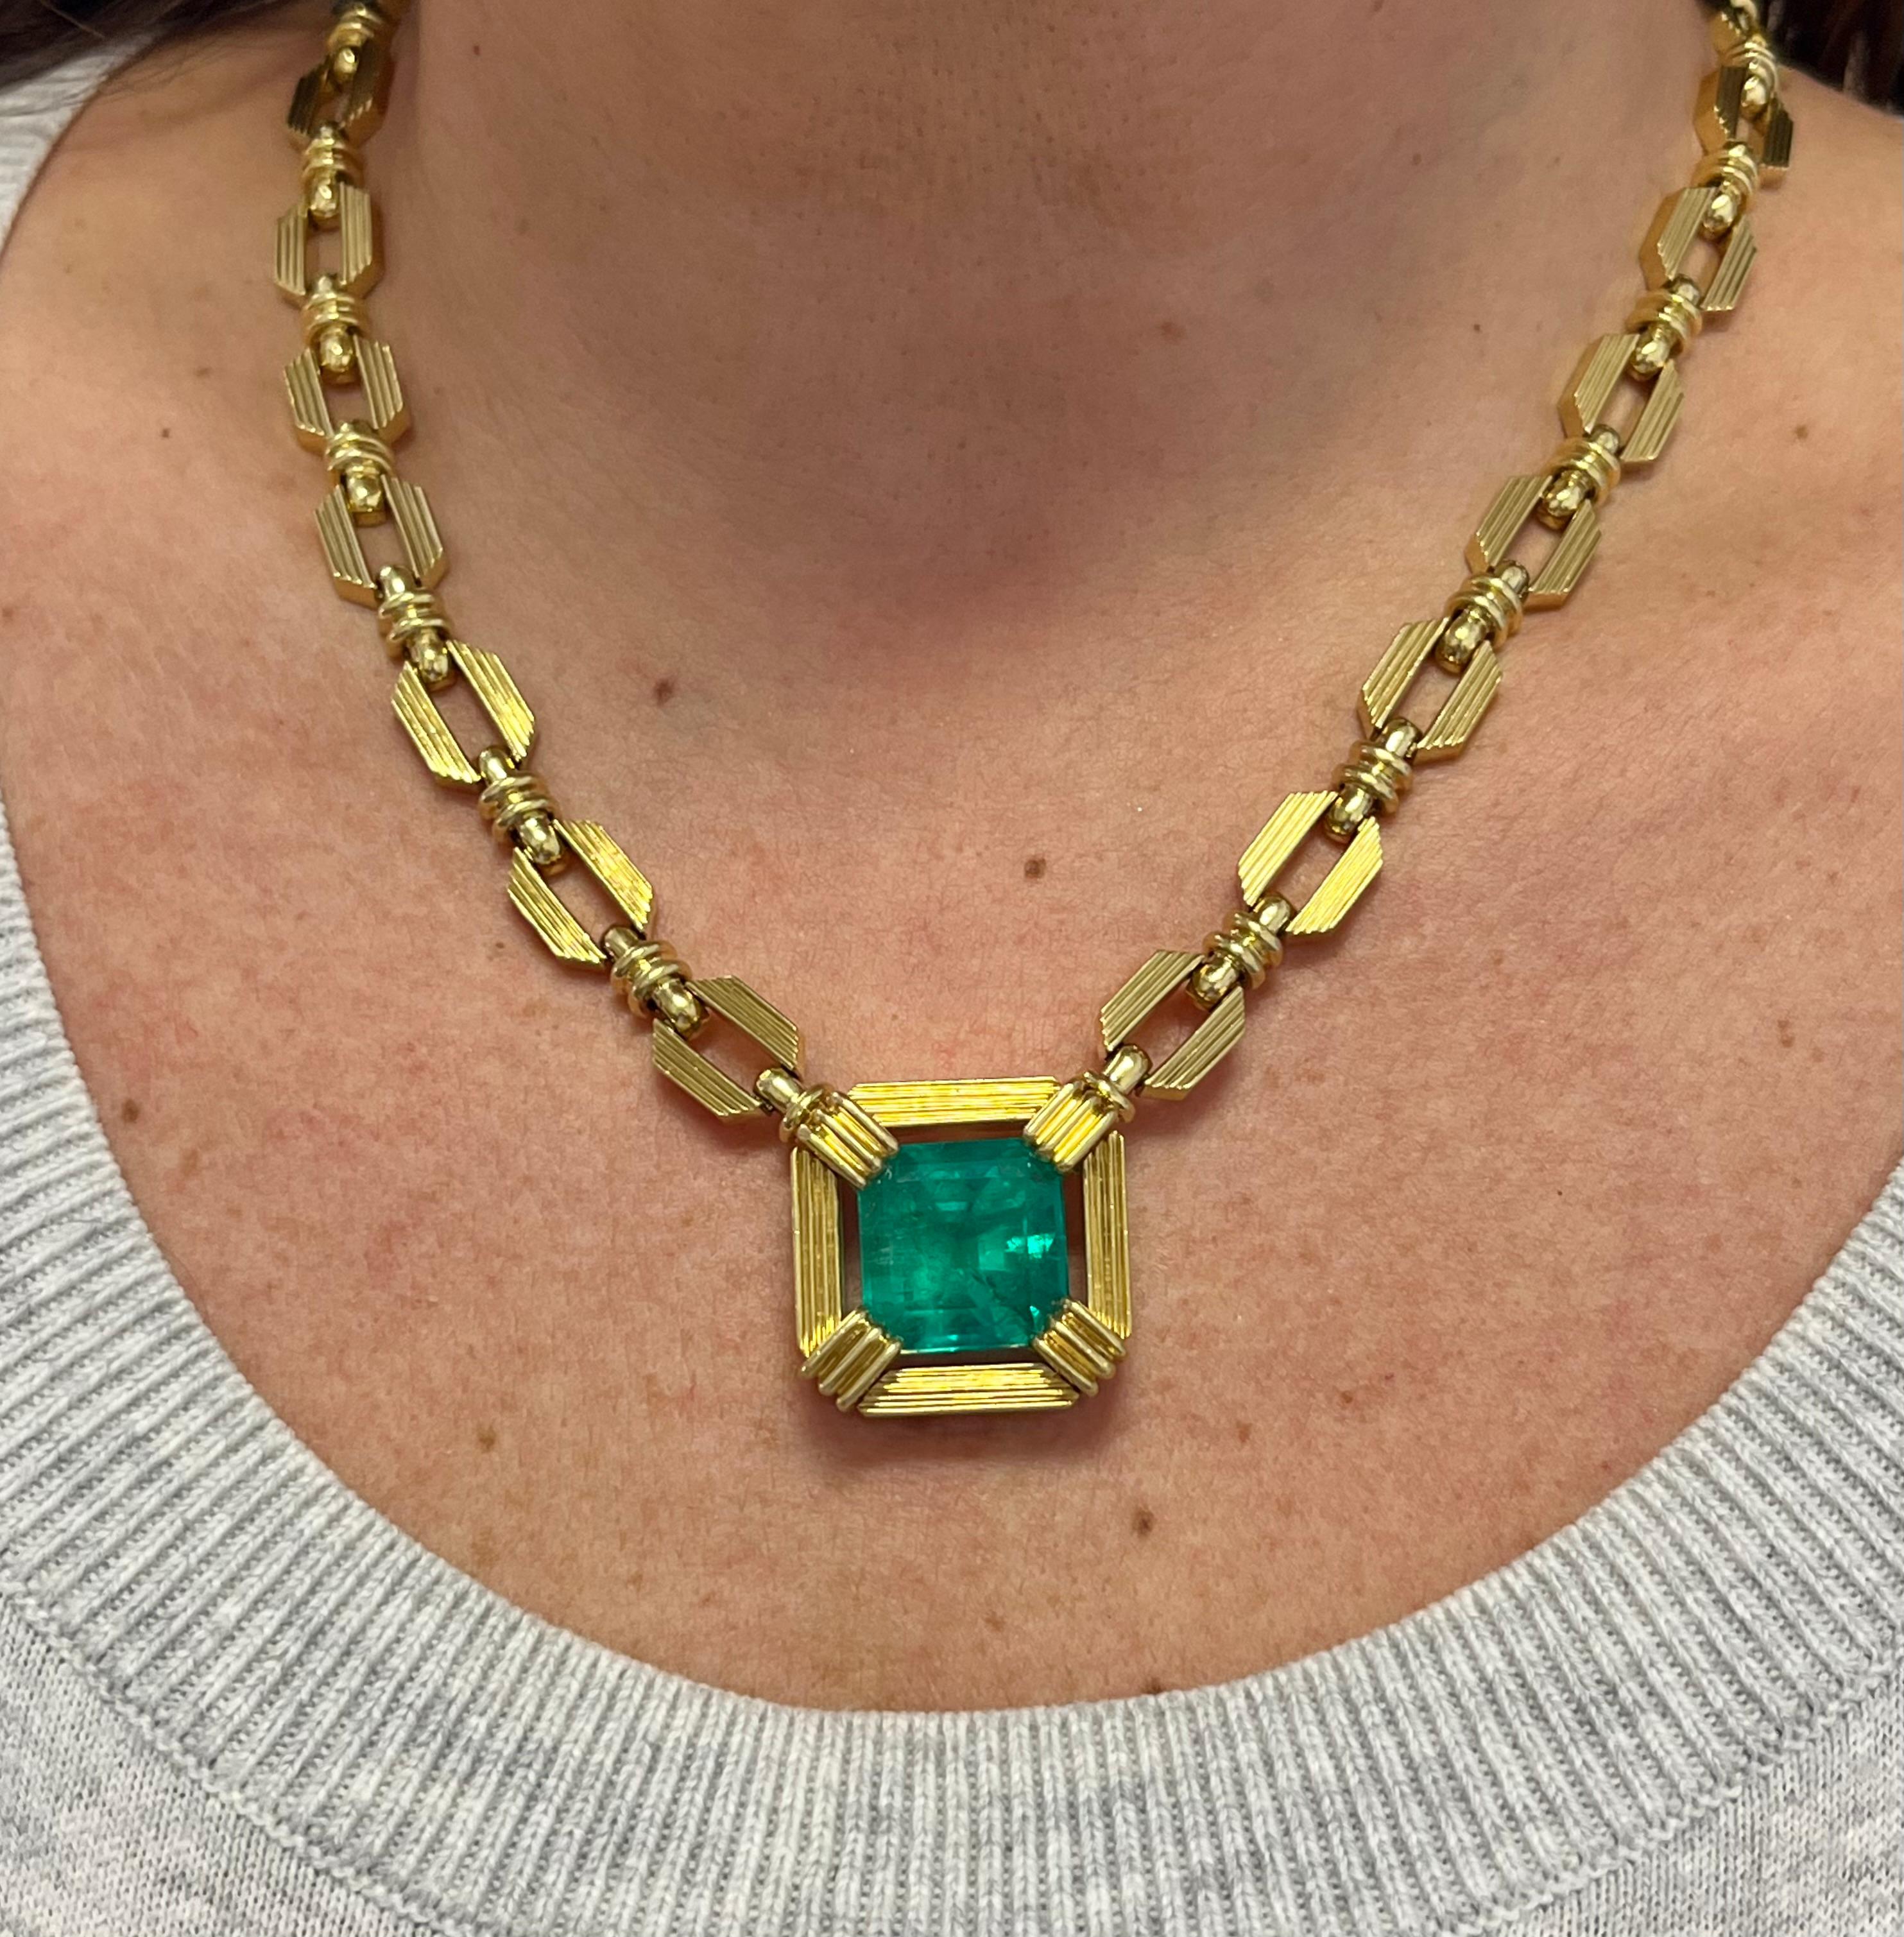 Henry Dunay Signed 19.48 Carat Colombian Emerald Necklace in 18k Yellow Gold For Sale 5